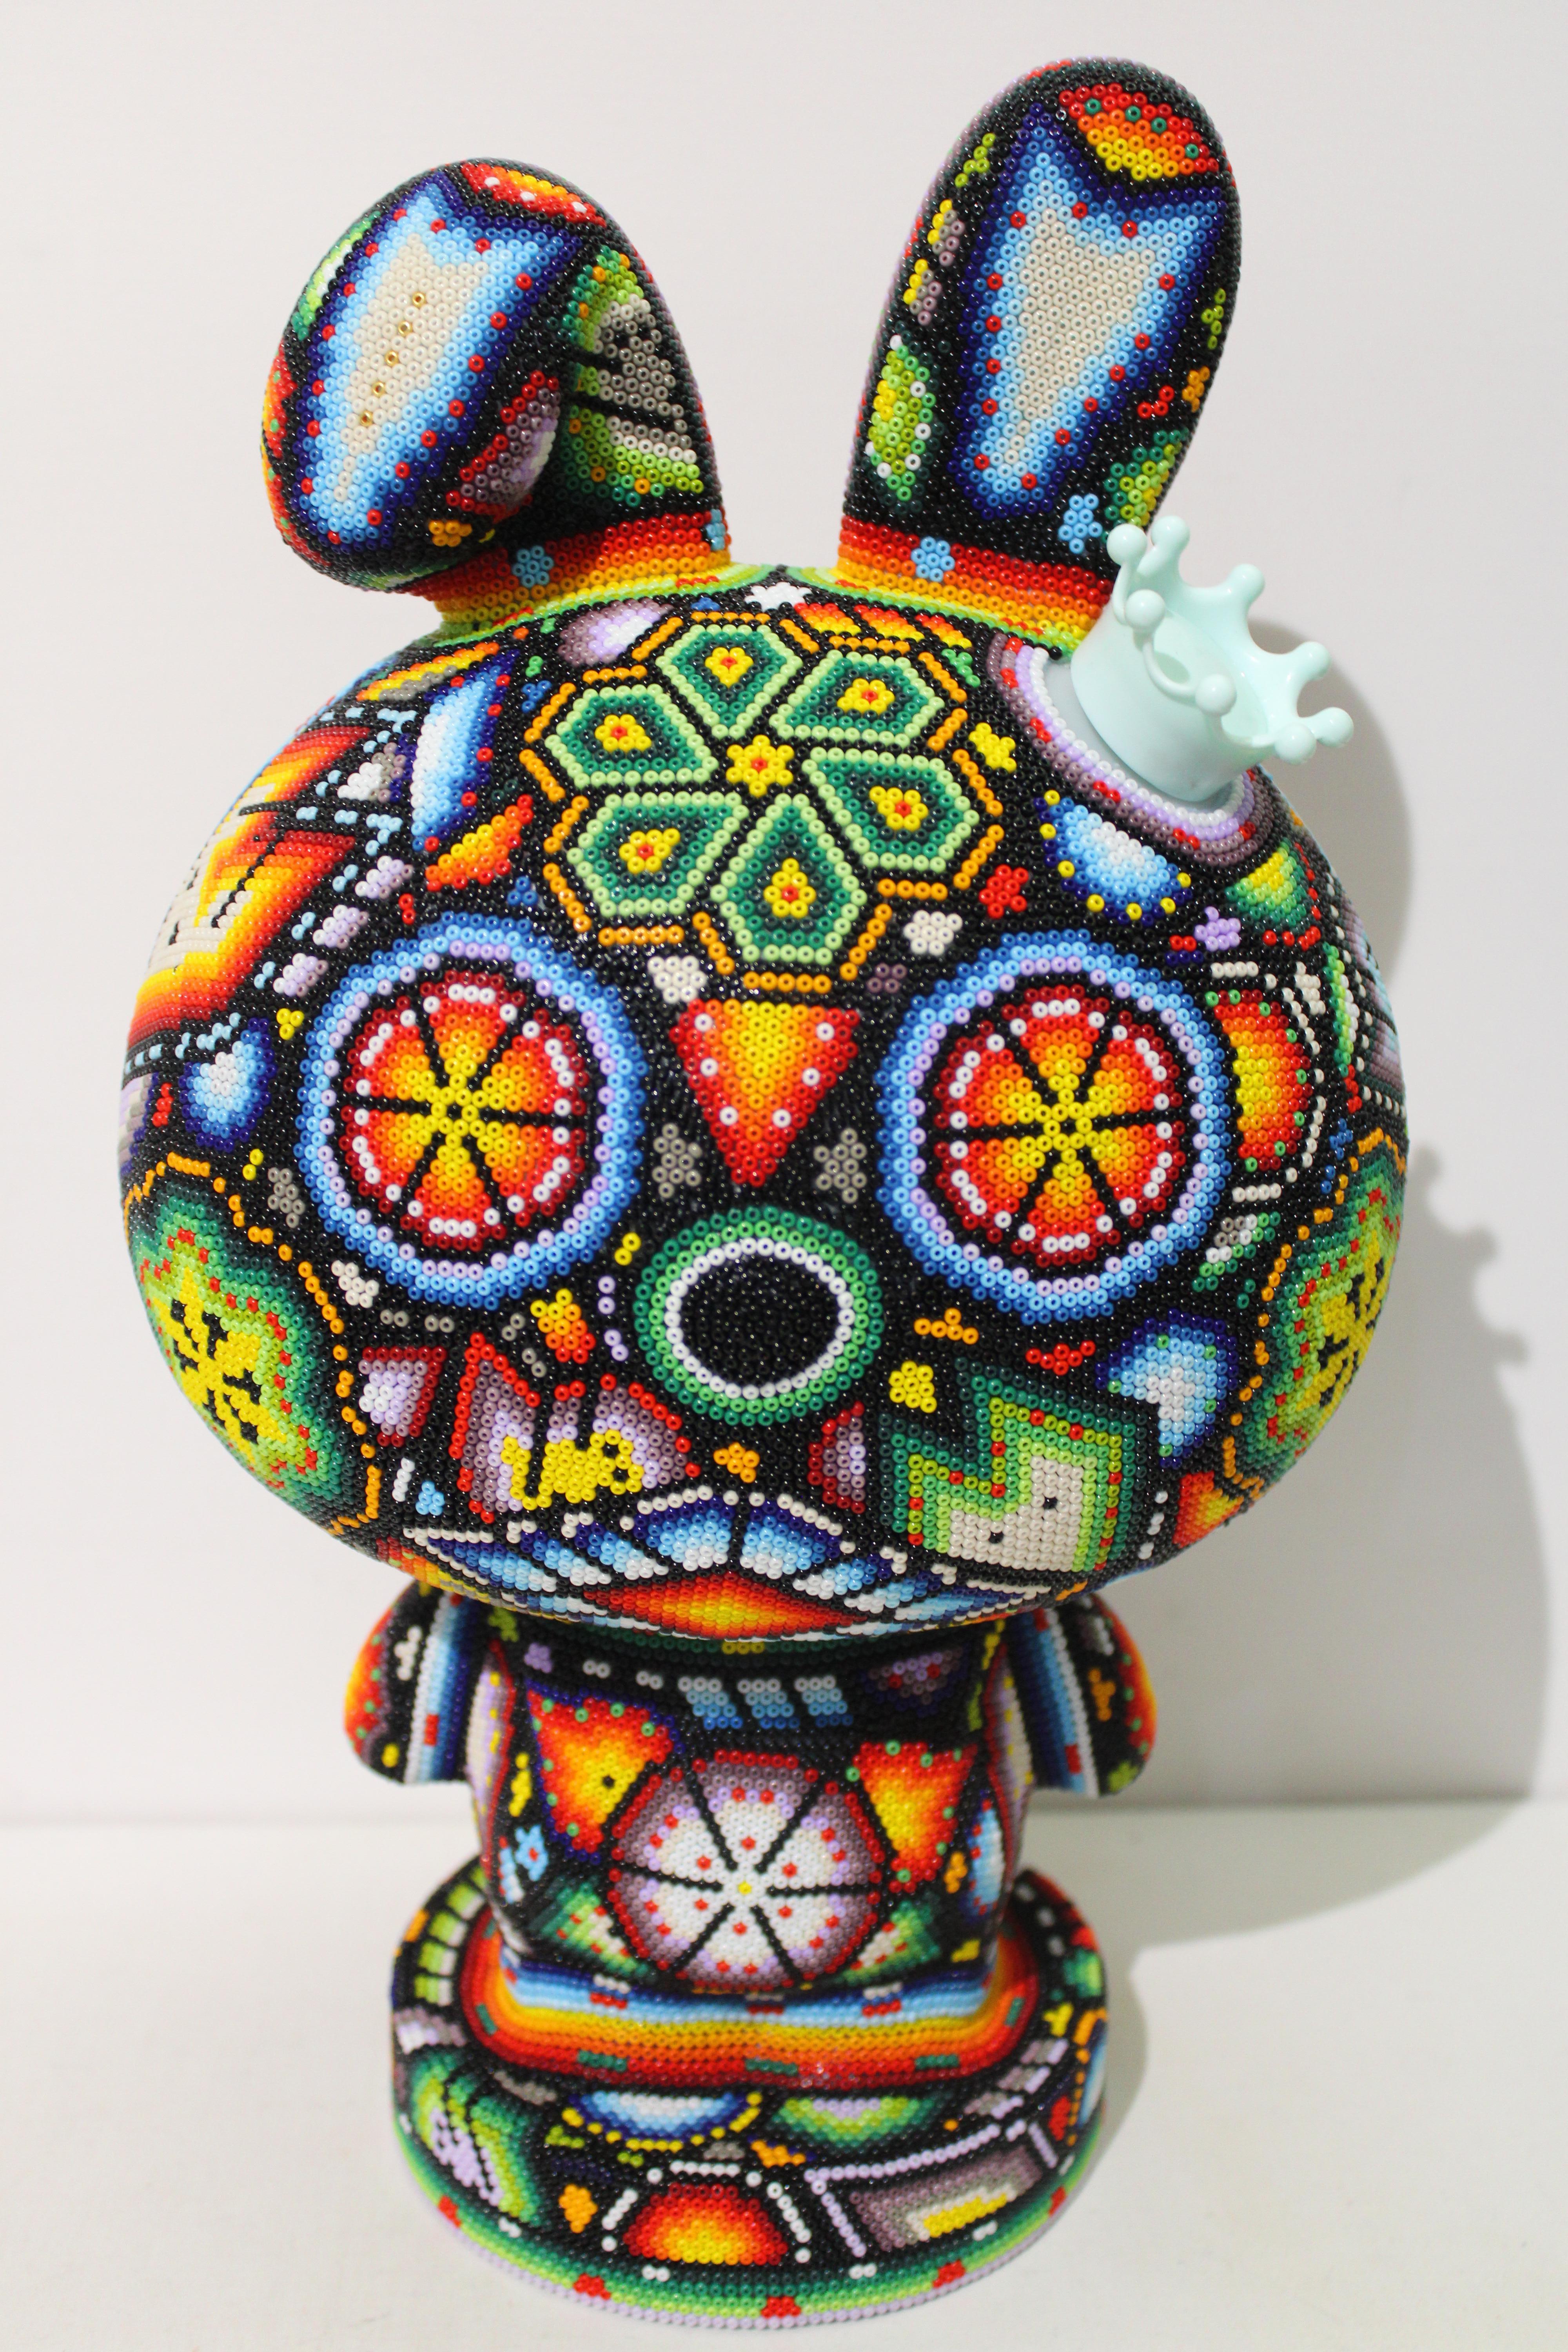 CHROMA aka Rick Wolfryd  Abstract Sculpture - "Care Bear"  from Huichol ALTERATIONS Series